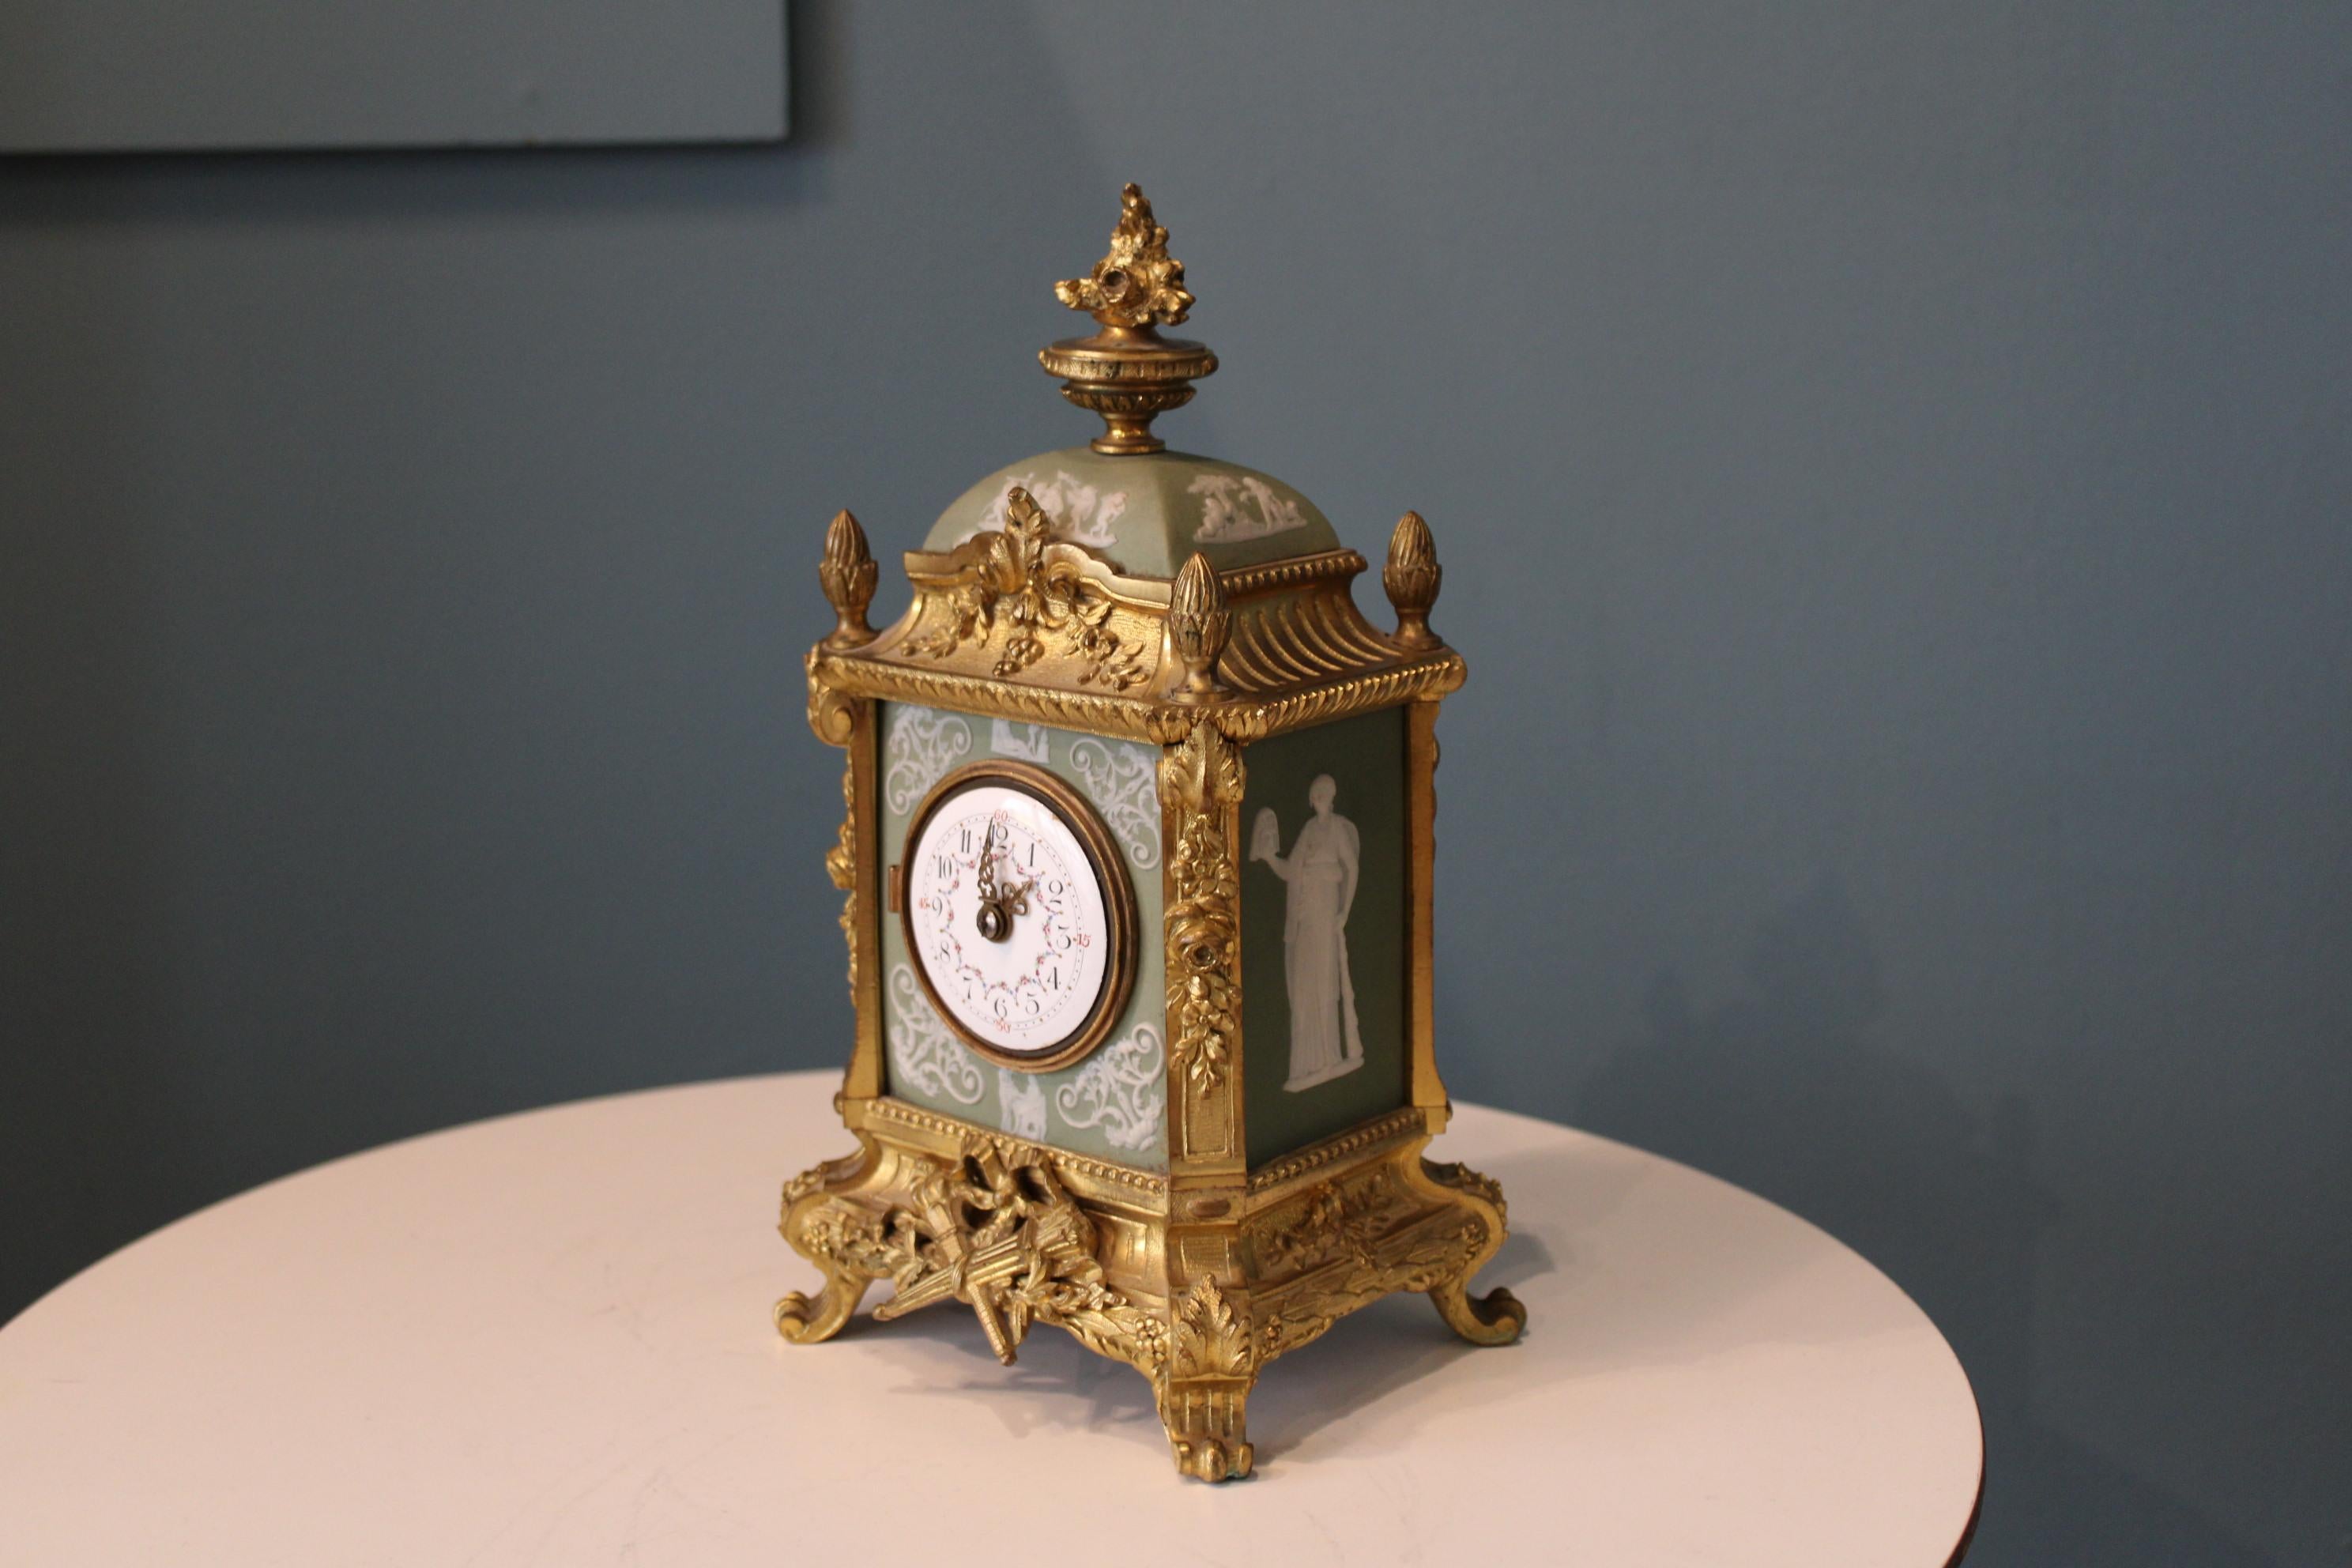 Small Napoleonic clock.
Second empire style.
France, 19th century.

The clock doesn't work.